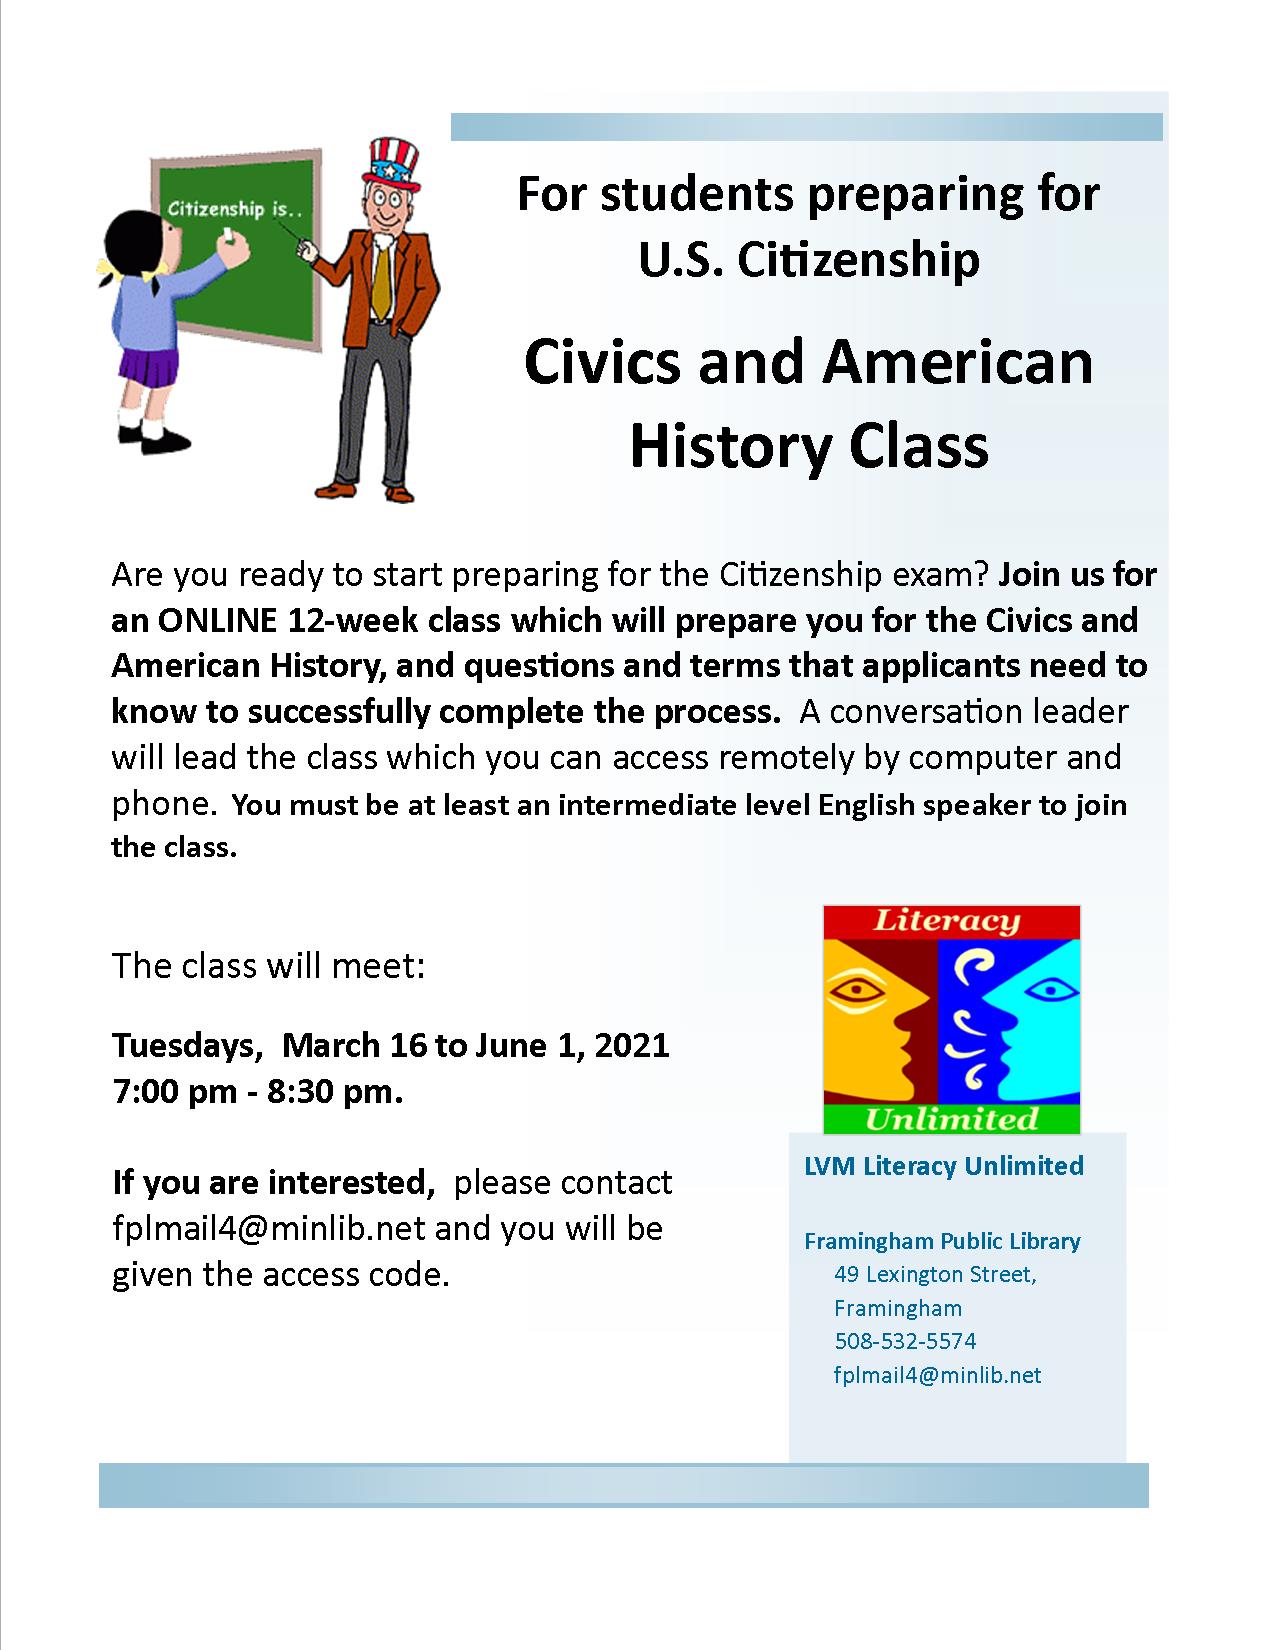 Civics and American History Class for Students Preparing for U.S. Citizenship thumbnail Photo